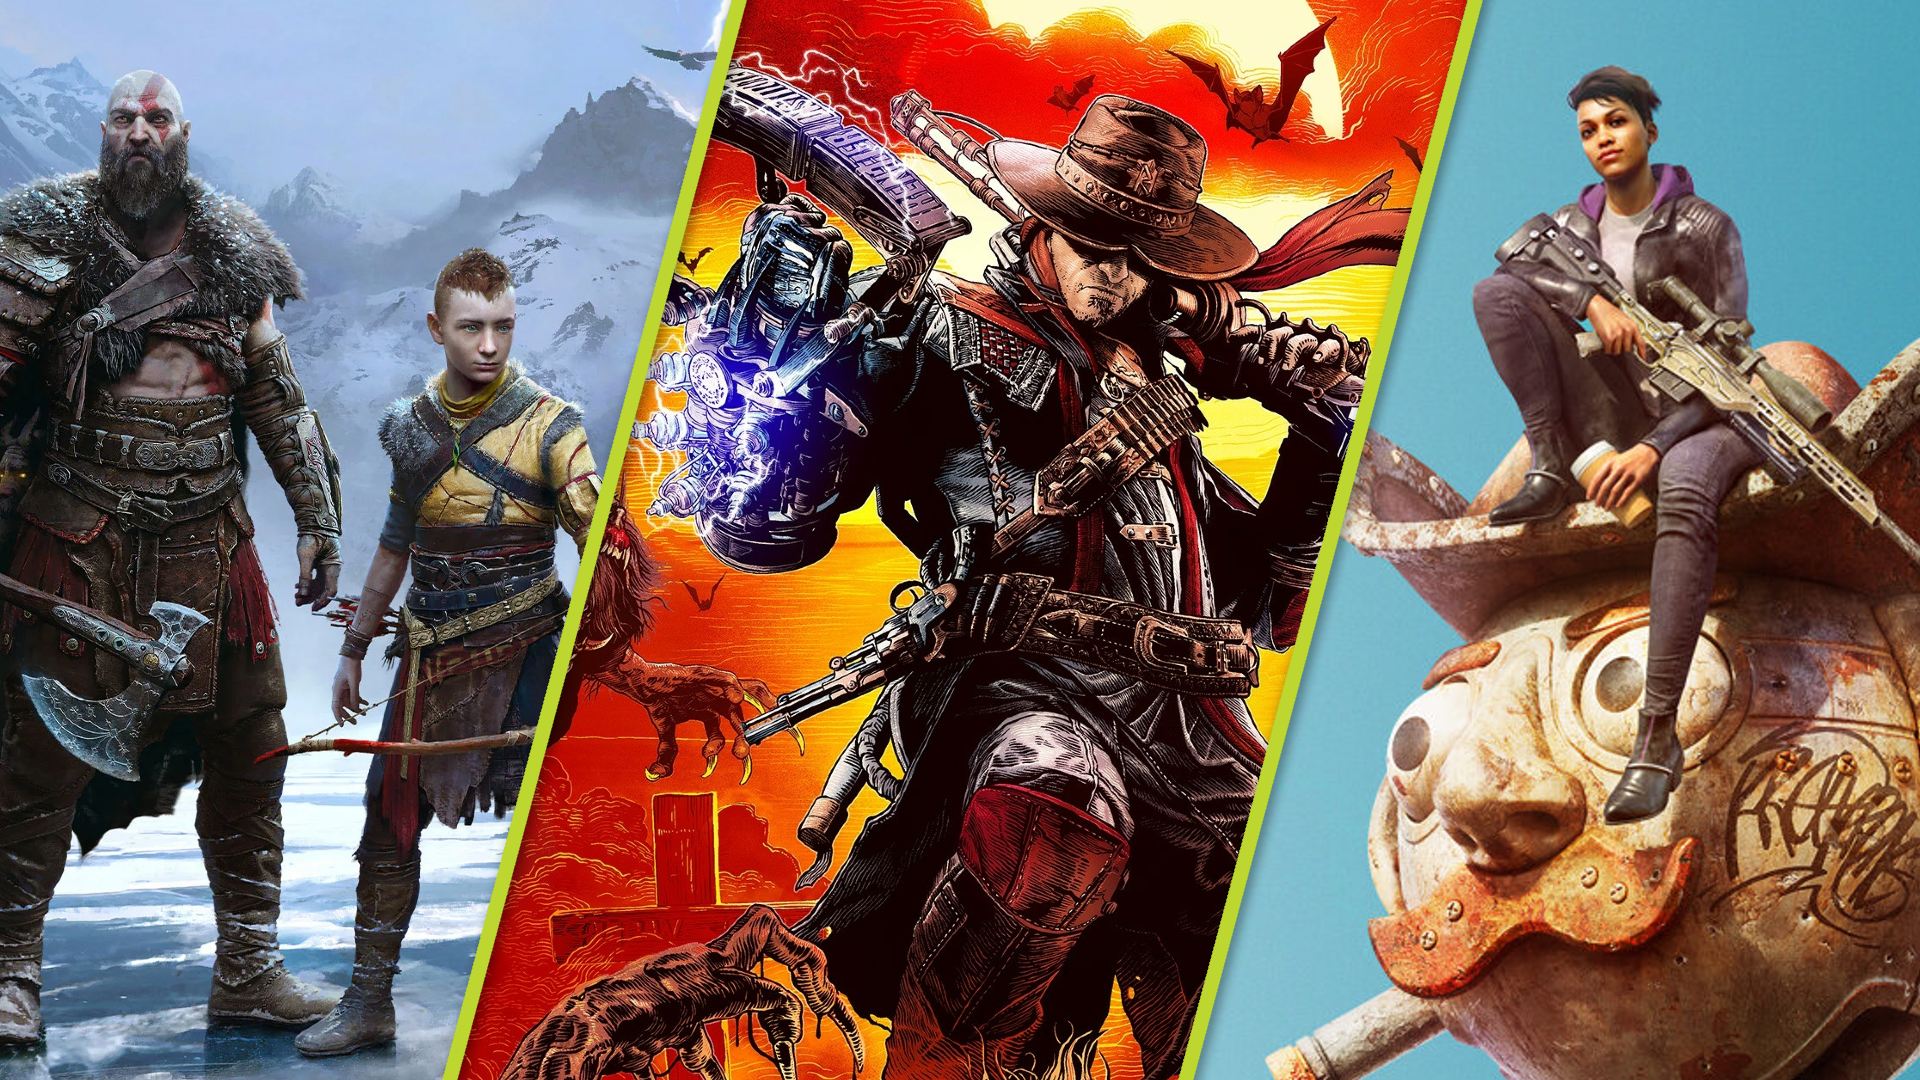 Upcoming PlayStation 4 Exclusives What to Look Forward To